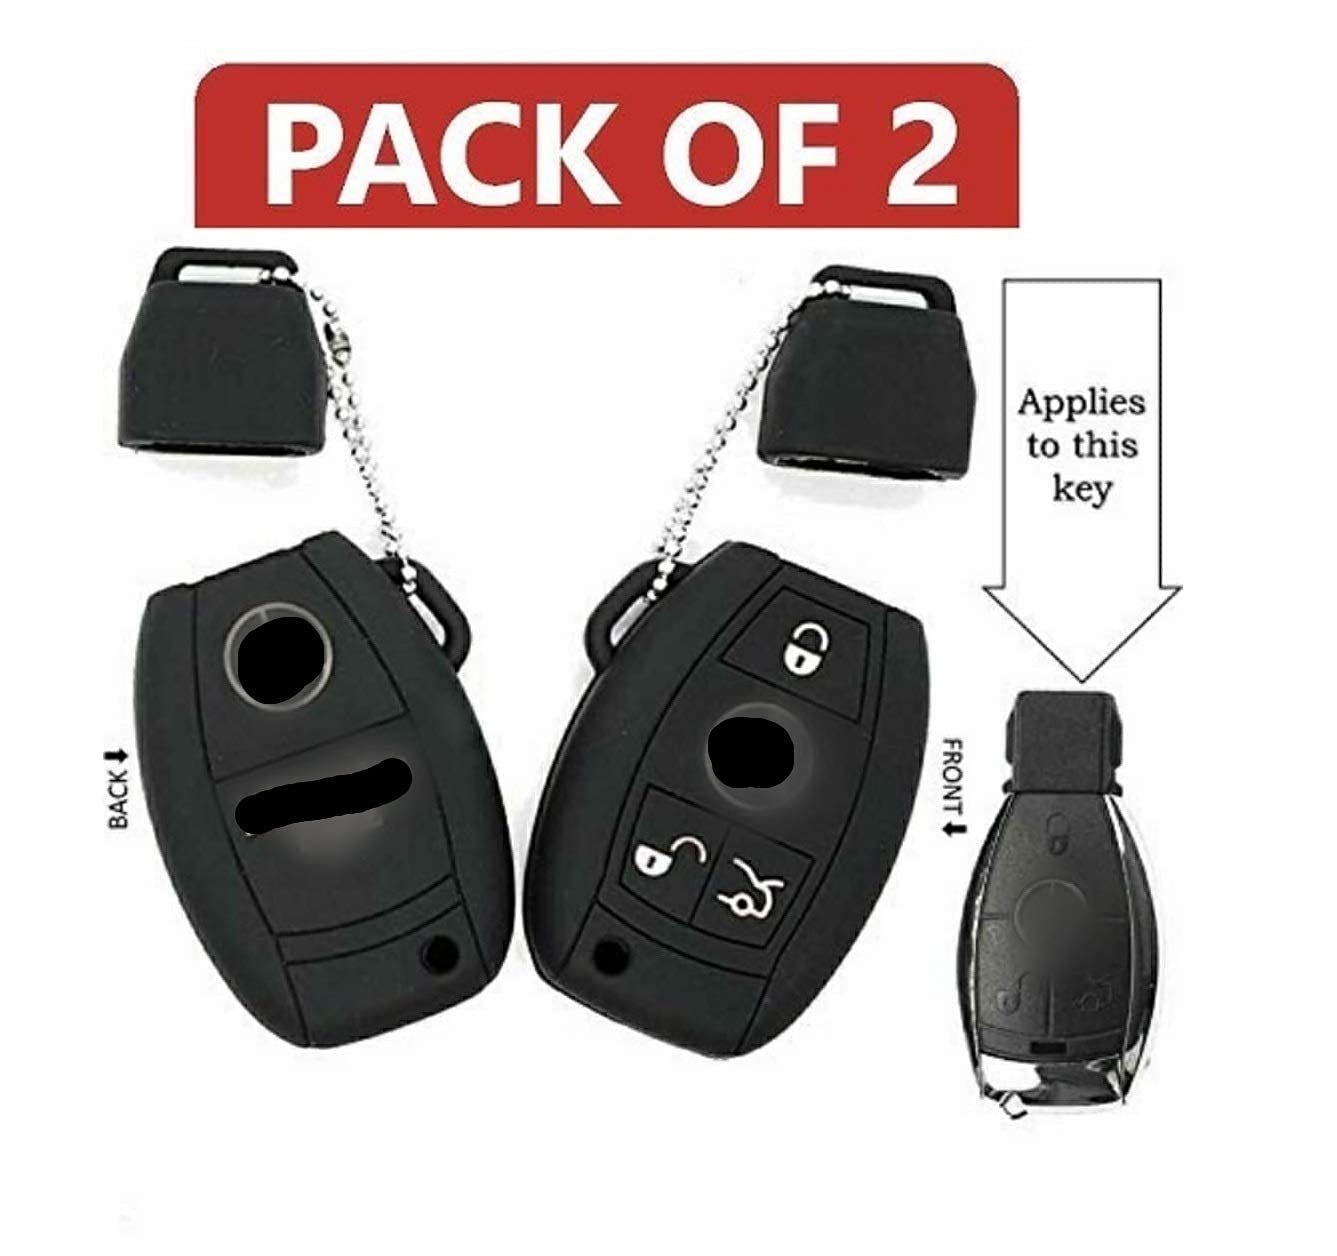 Silicone Flip Key Cover Compatible with Mercedes Benz 3 Button Smart Key (Black, Pack of 2) Image